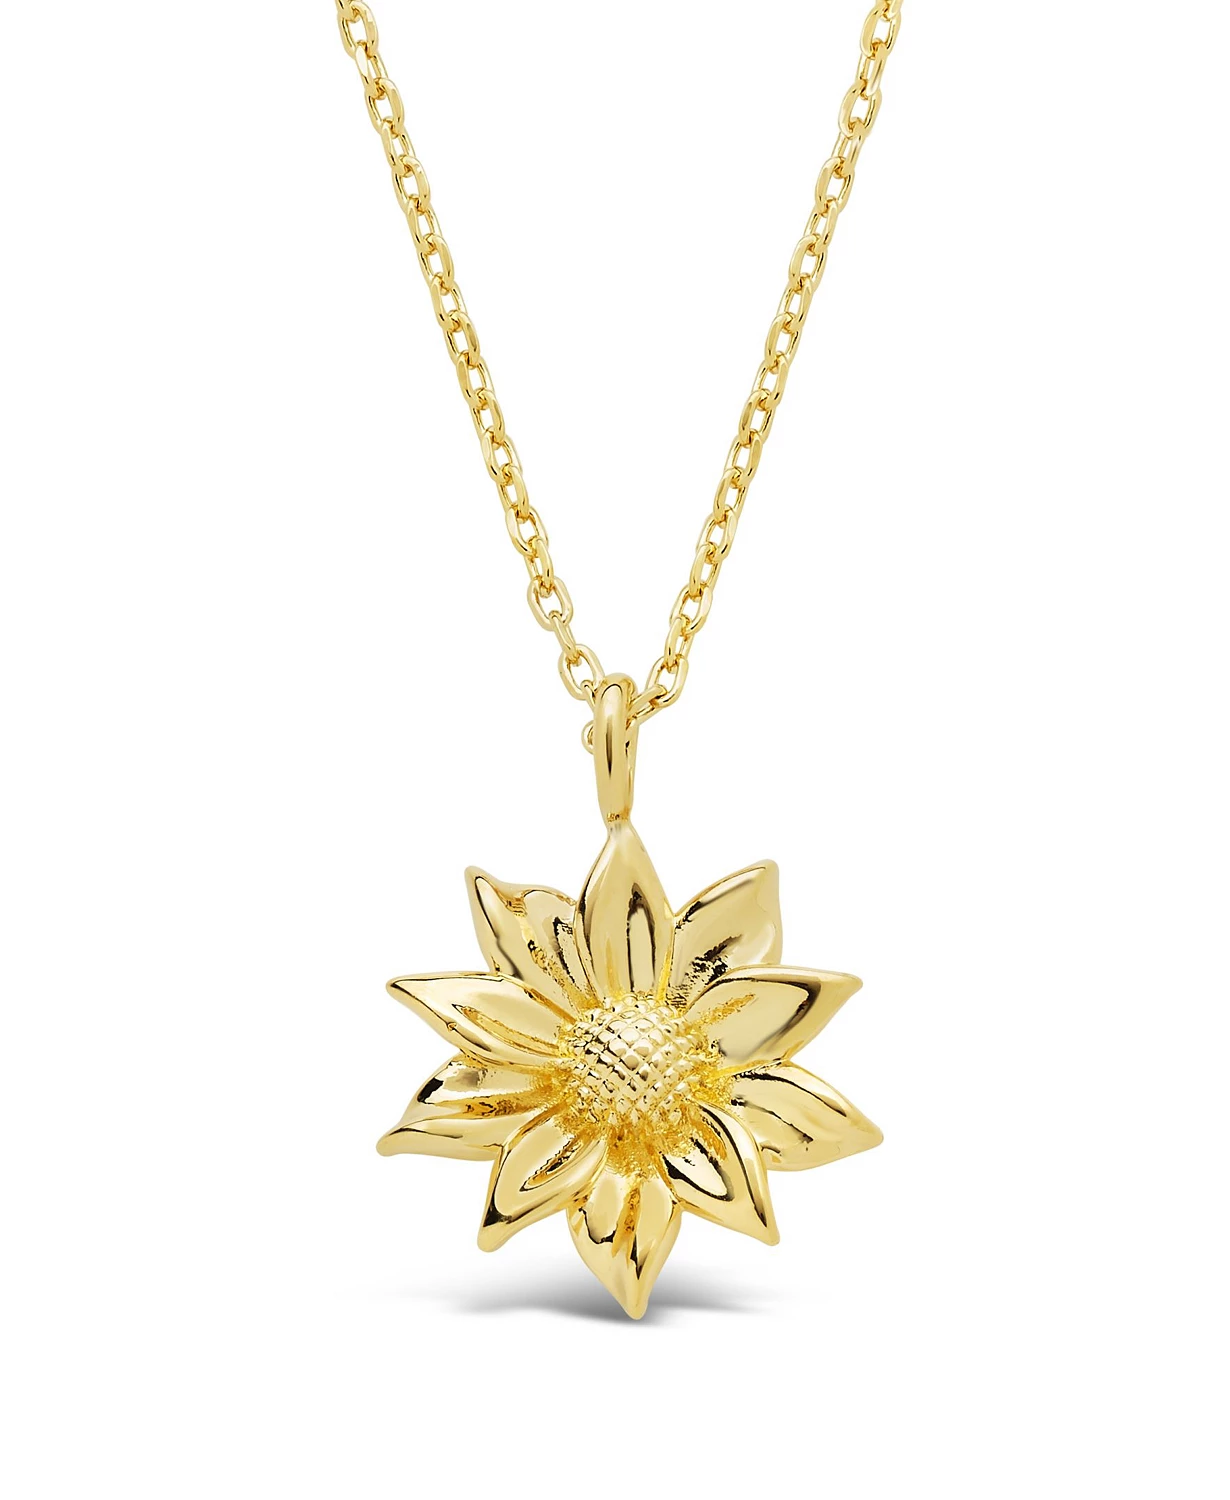 Women's Sunflower Pendant Necklace.  Available in 14K Gold Plated or Silver.